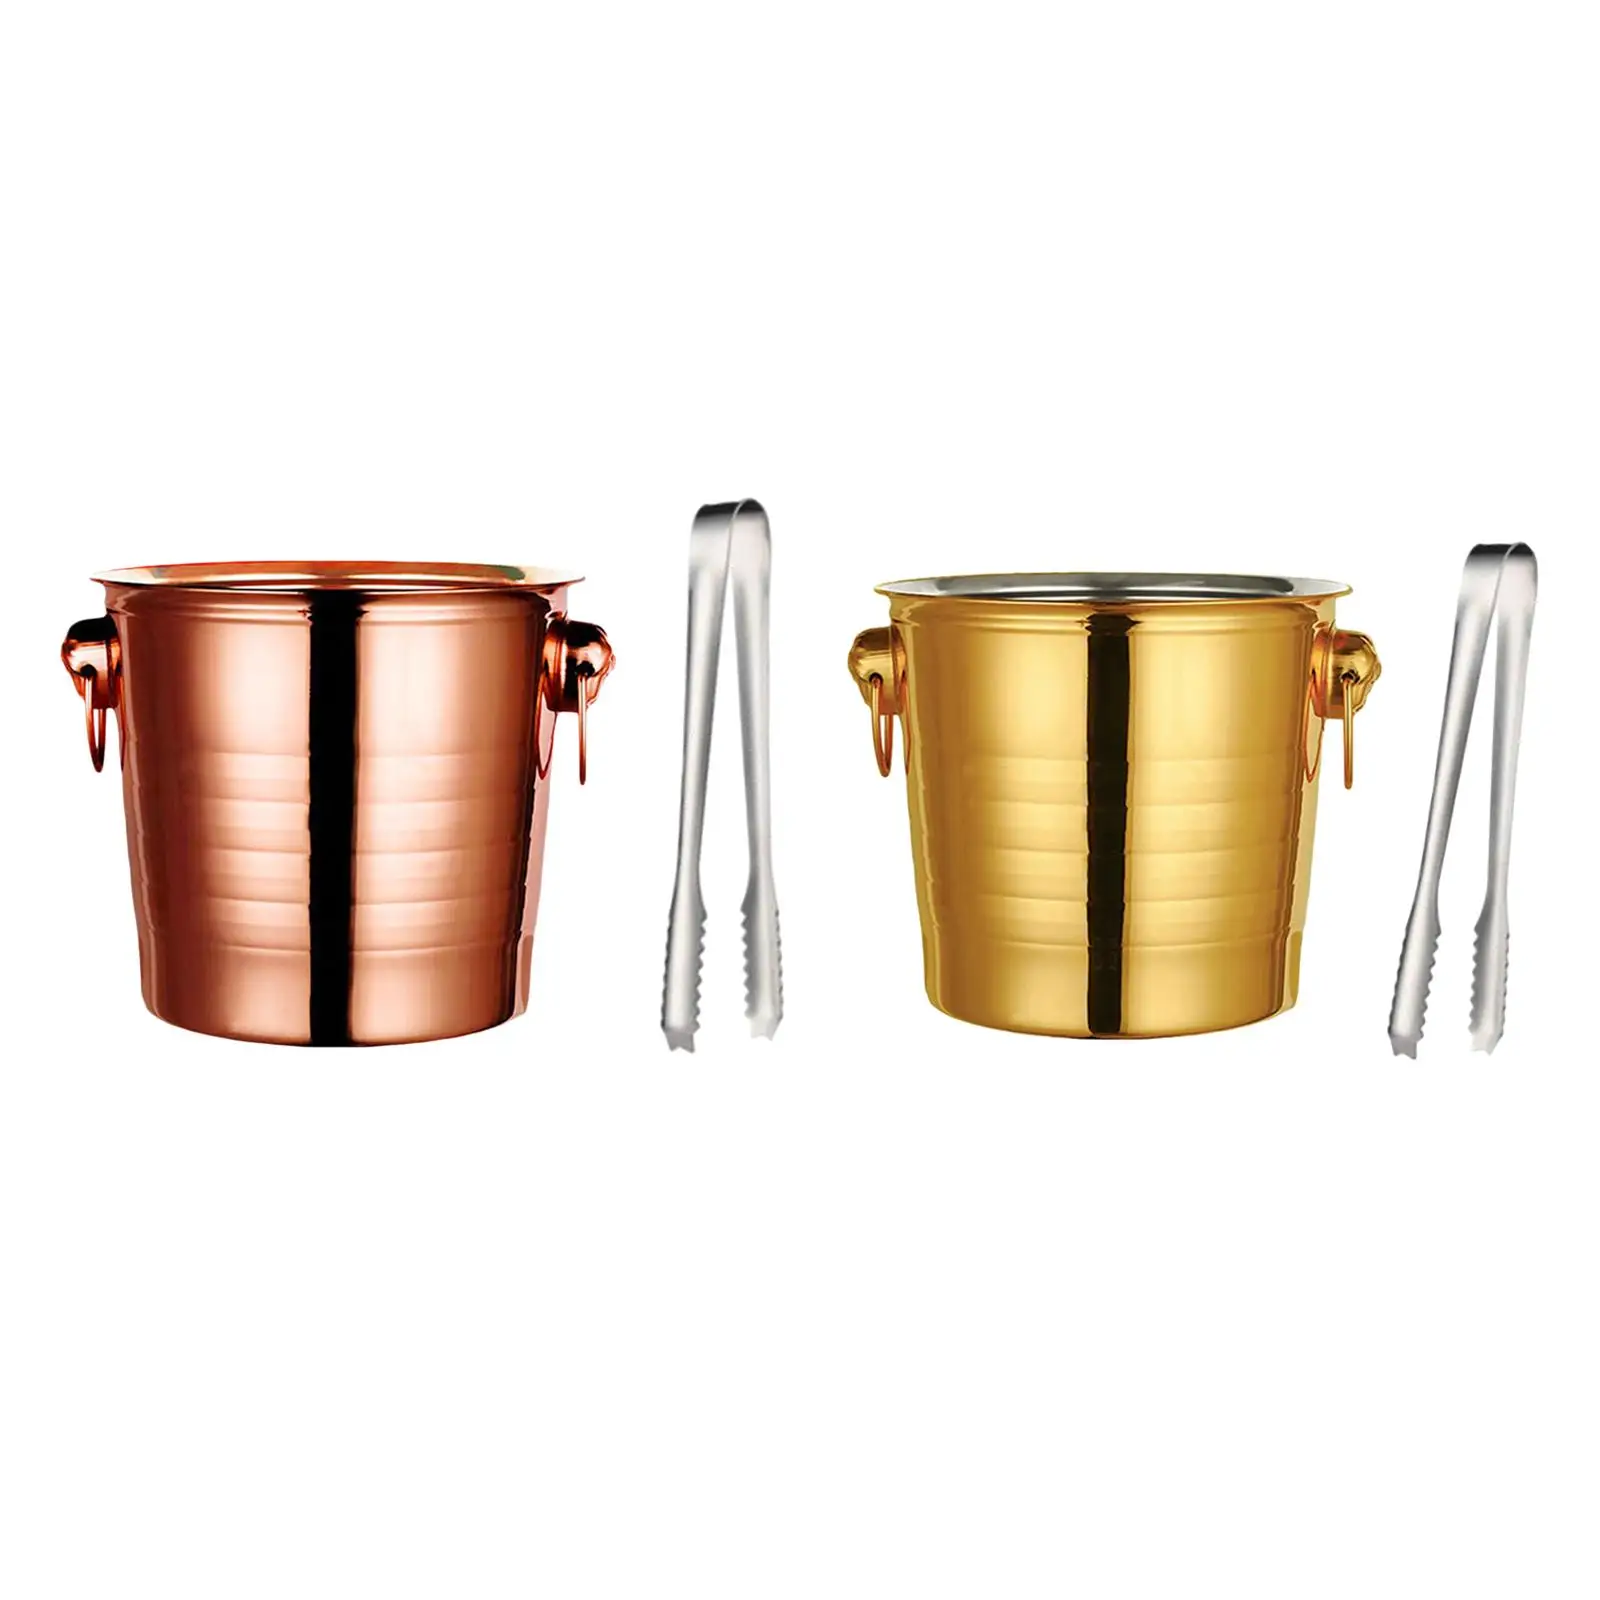 Stainless Steel Ice Bucket, with Ice Cube Clip, Drinks Chilling Bucket with Handles, Beverage Chilling Bucket for Parties BBQ